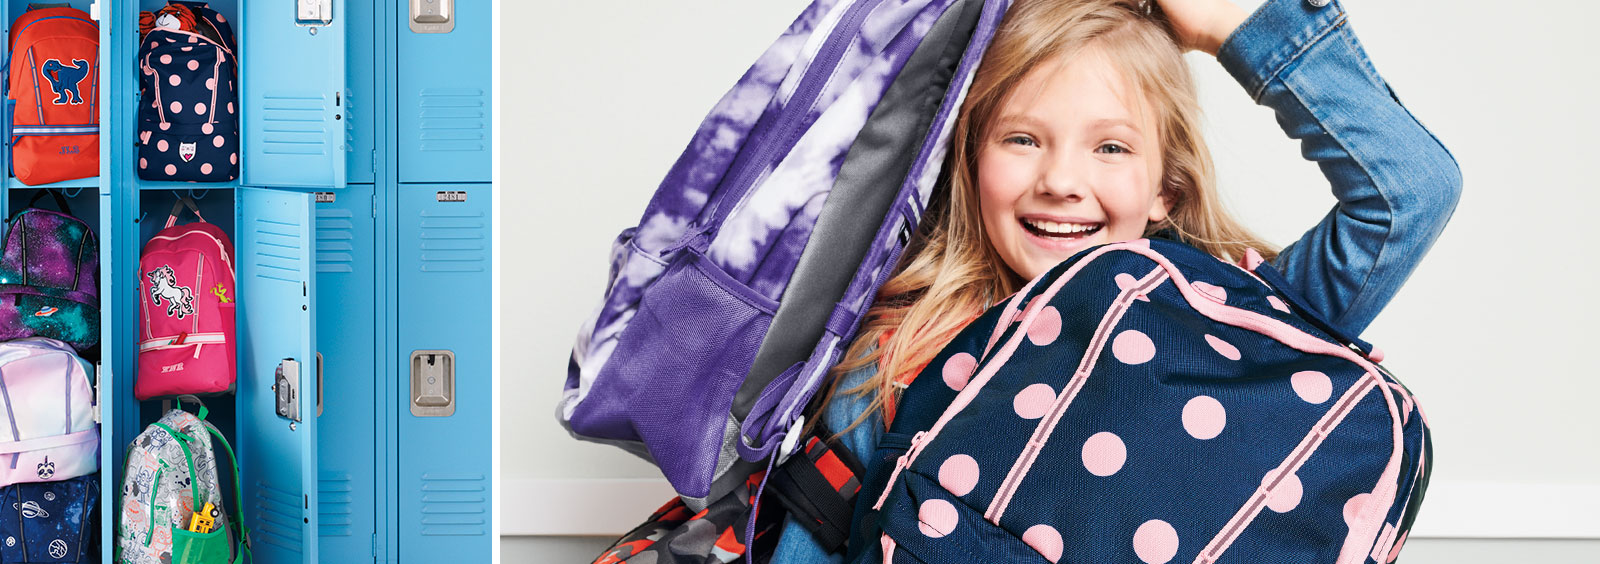 How to Pick the Perfect Backpack for Your Kids